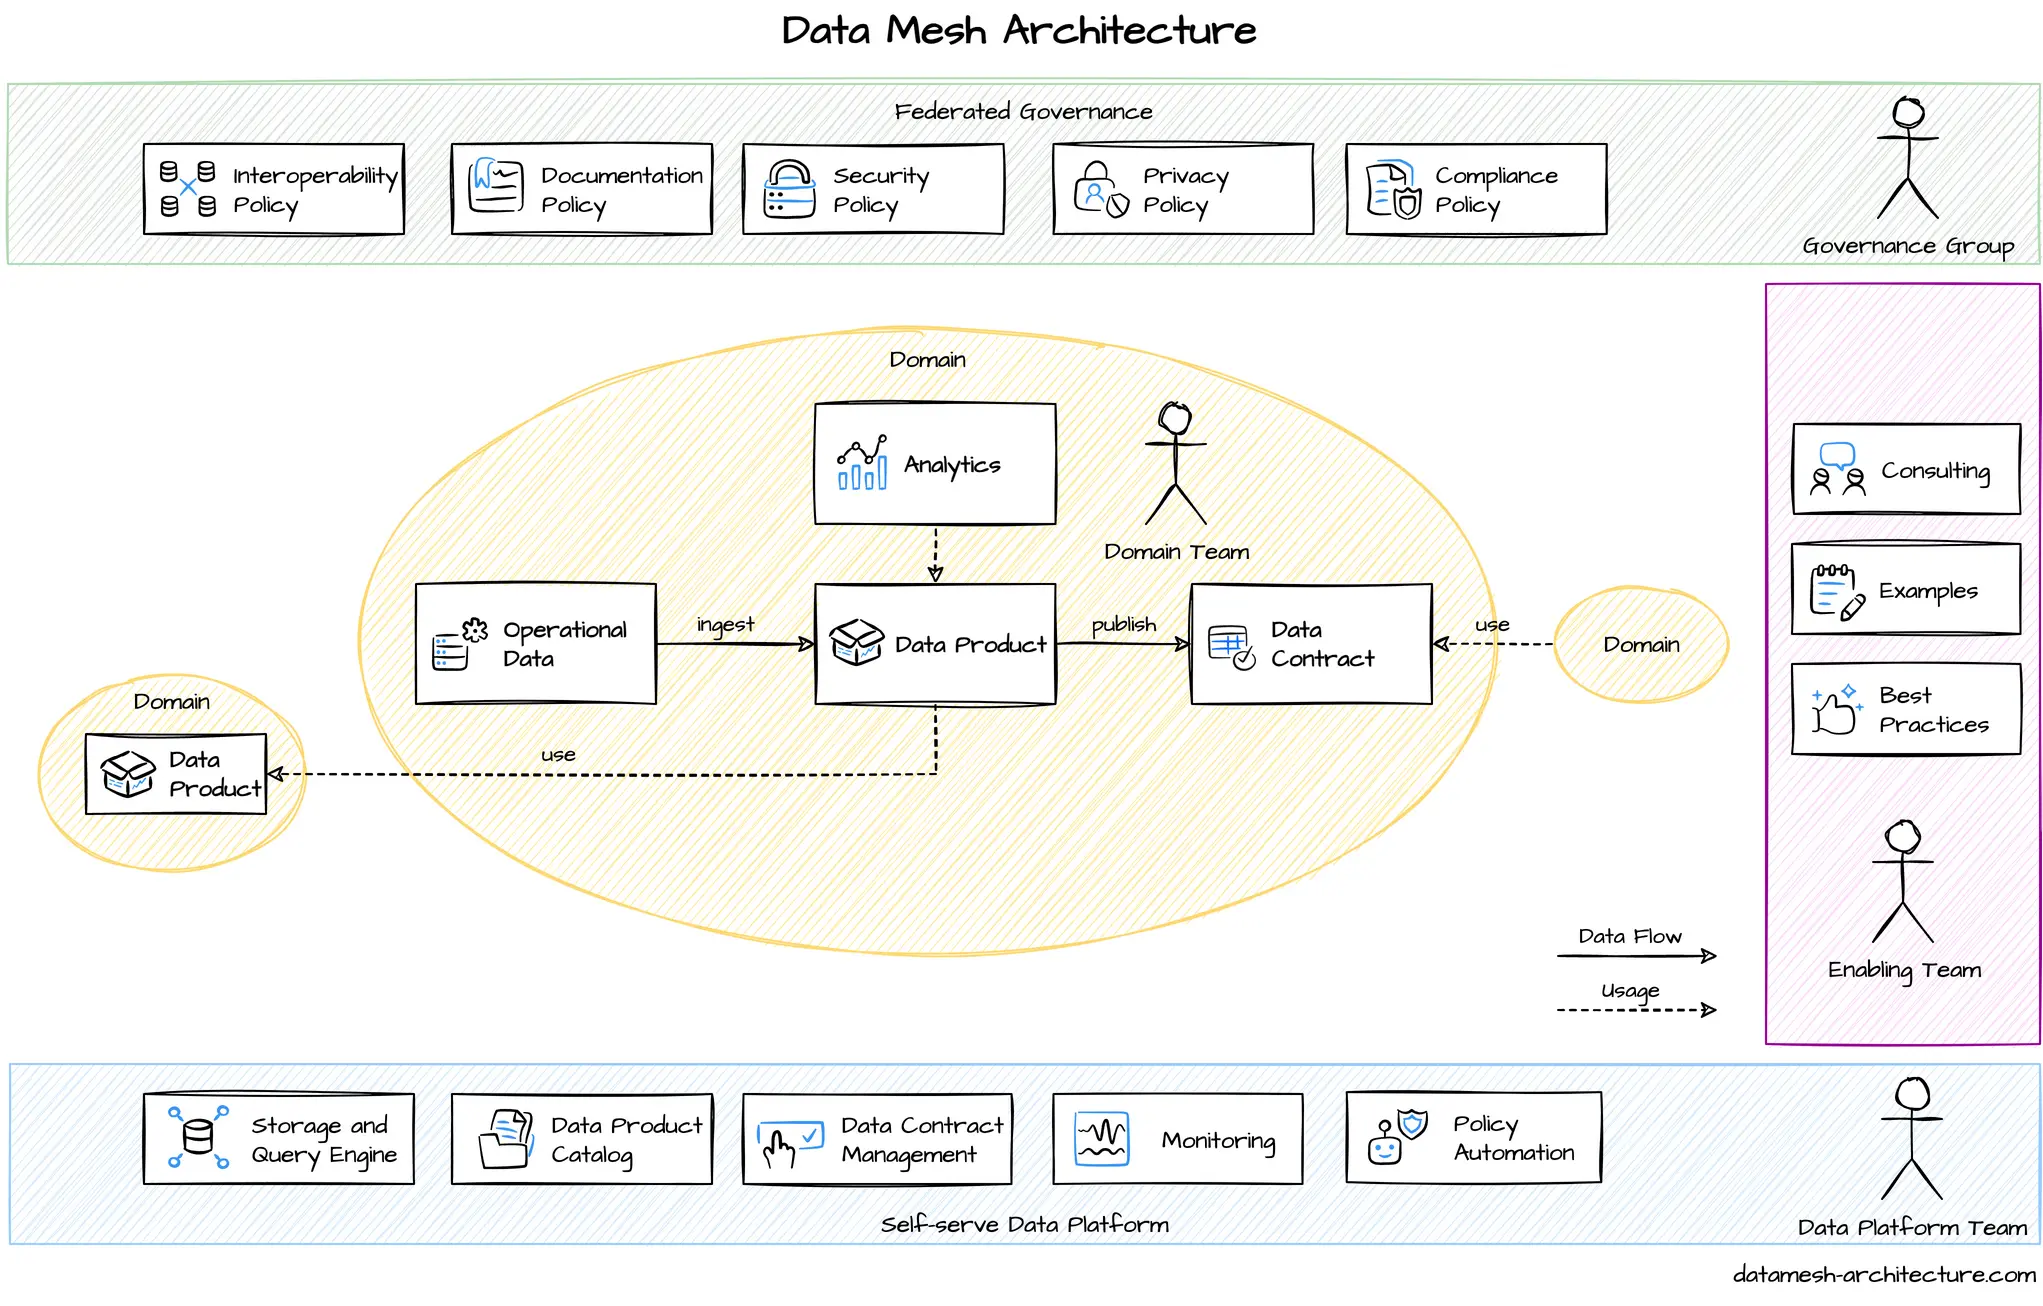 Data Mesh in practice: Getting off to the right start